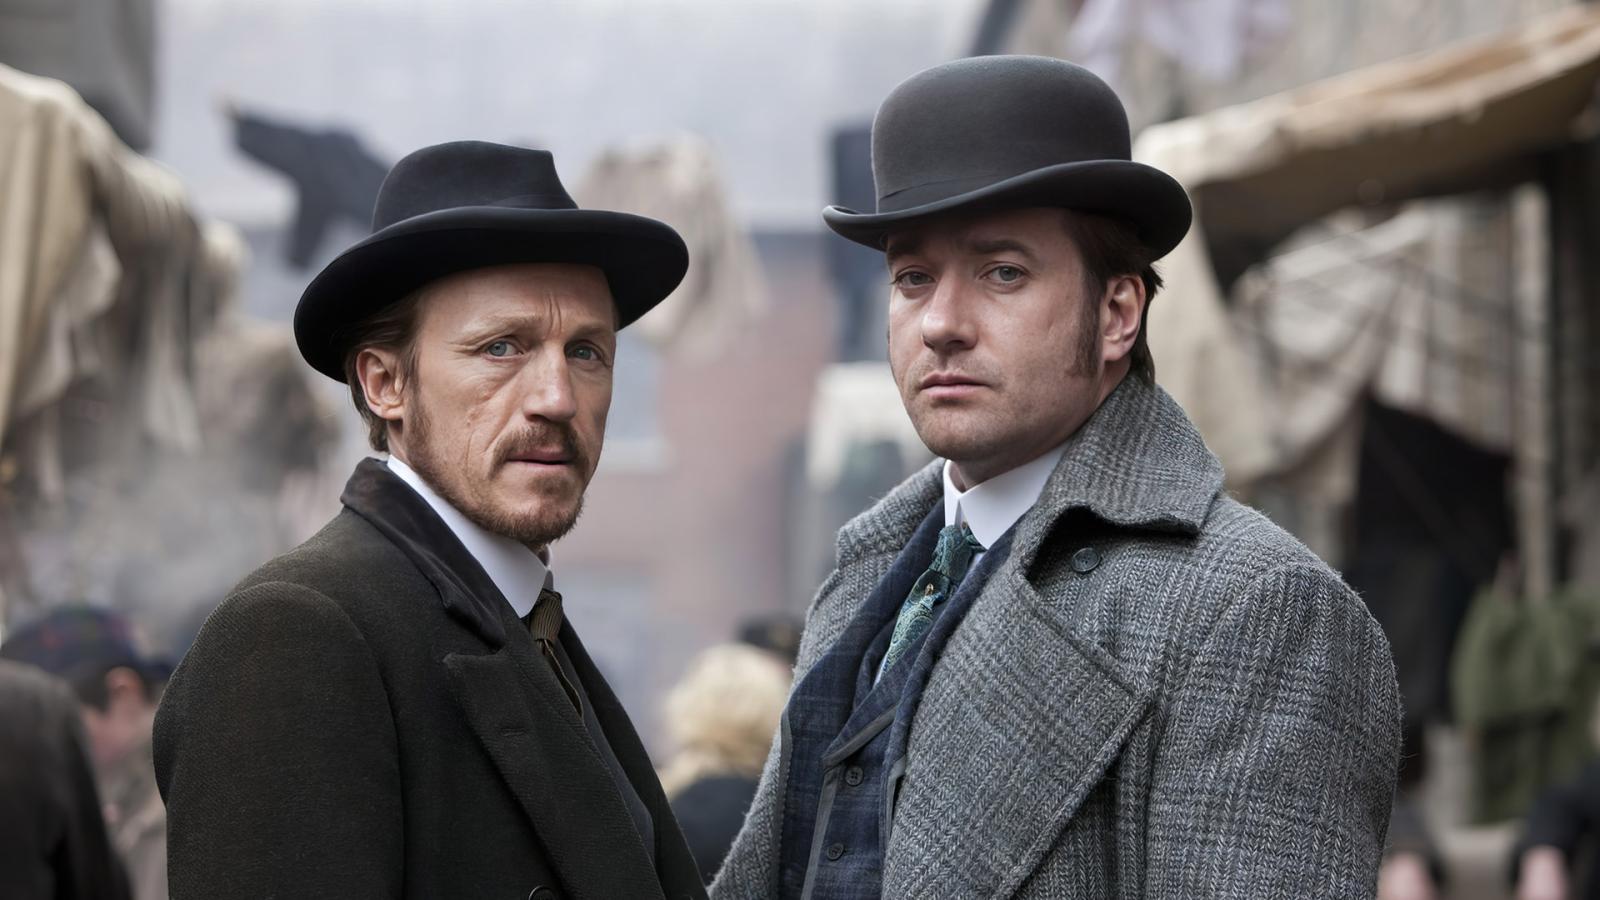 10 Stunning Period Dramas on Prime to Transport You Back in Time - image 3